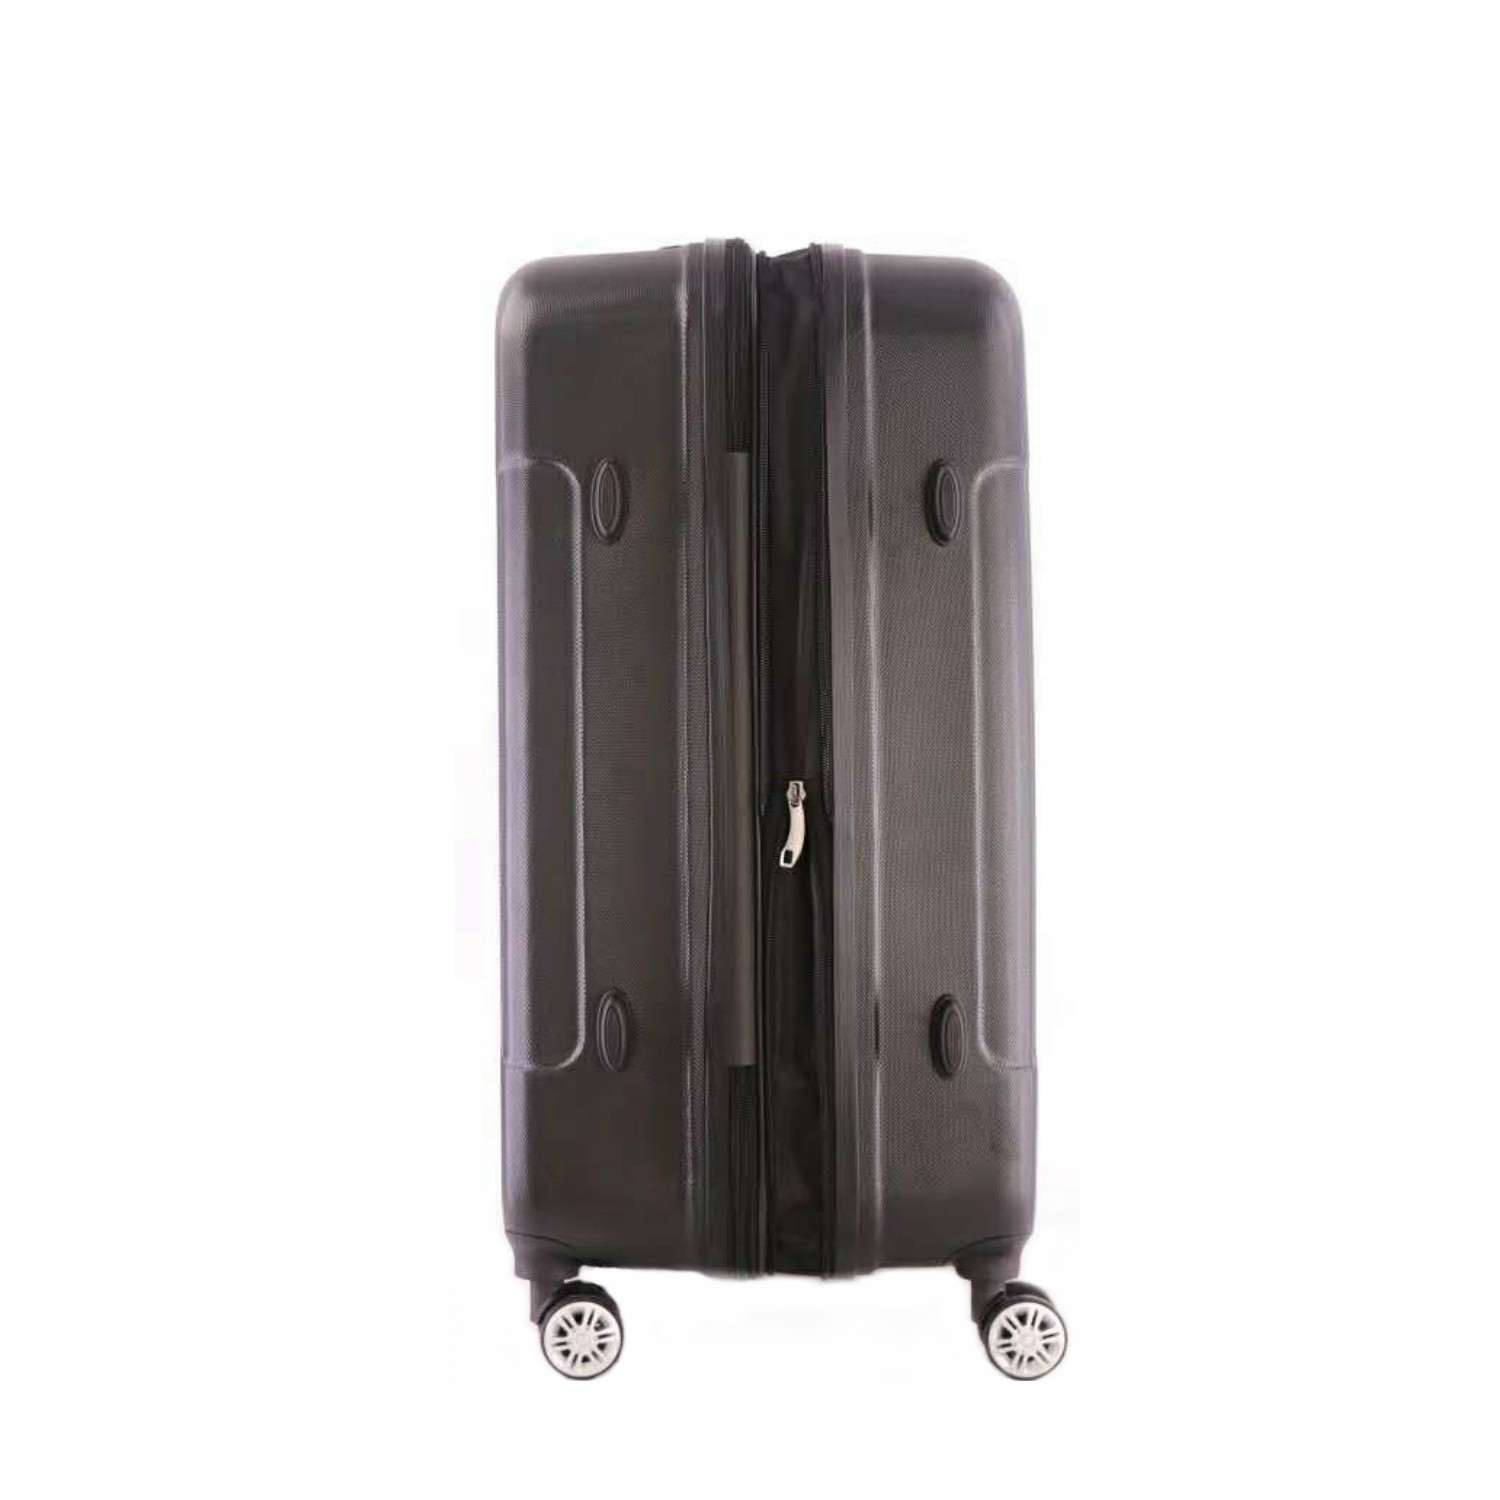 An outdoor trolley luggage made of ABS material with a spacious interior and zipper pockets inside